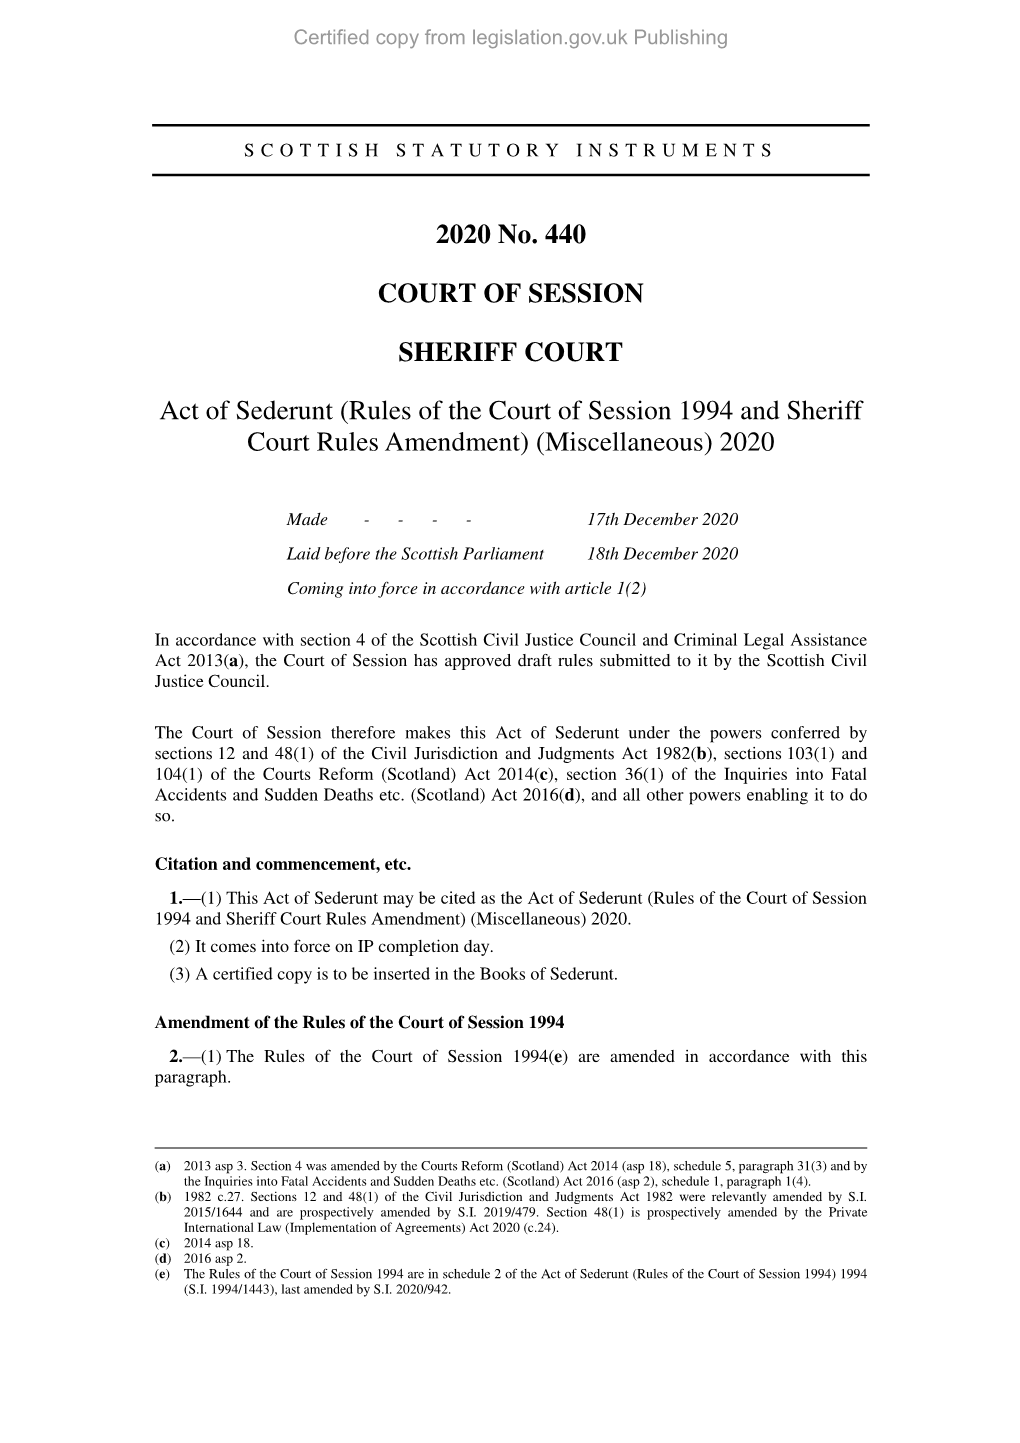 Act of Sederunt (Rules of the Court of Session 1994 and Sheriff Court Rules Amendment) (Miscellaneous) 2020